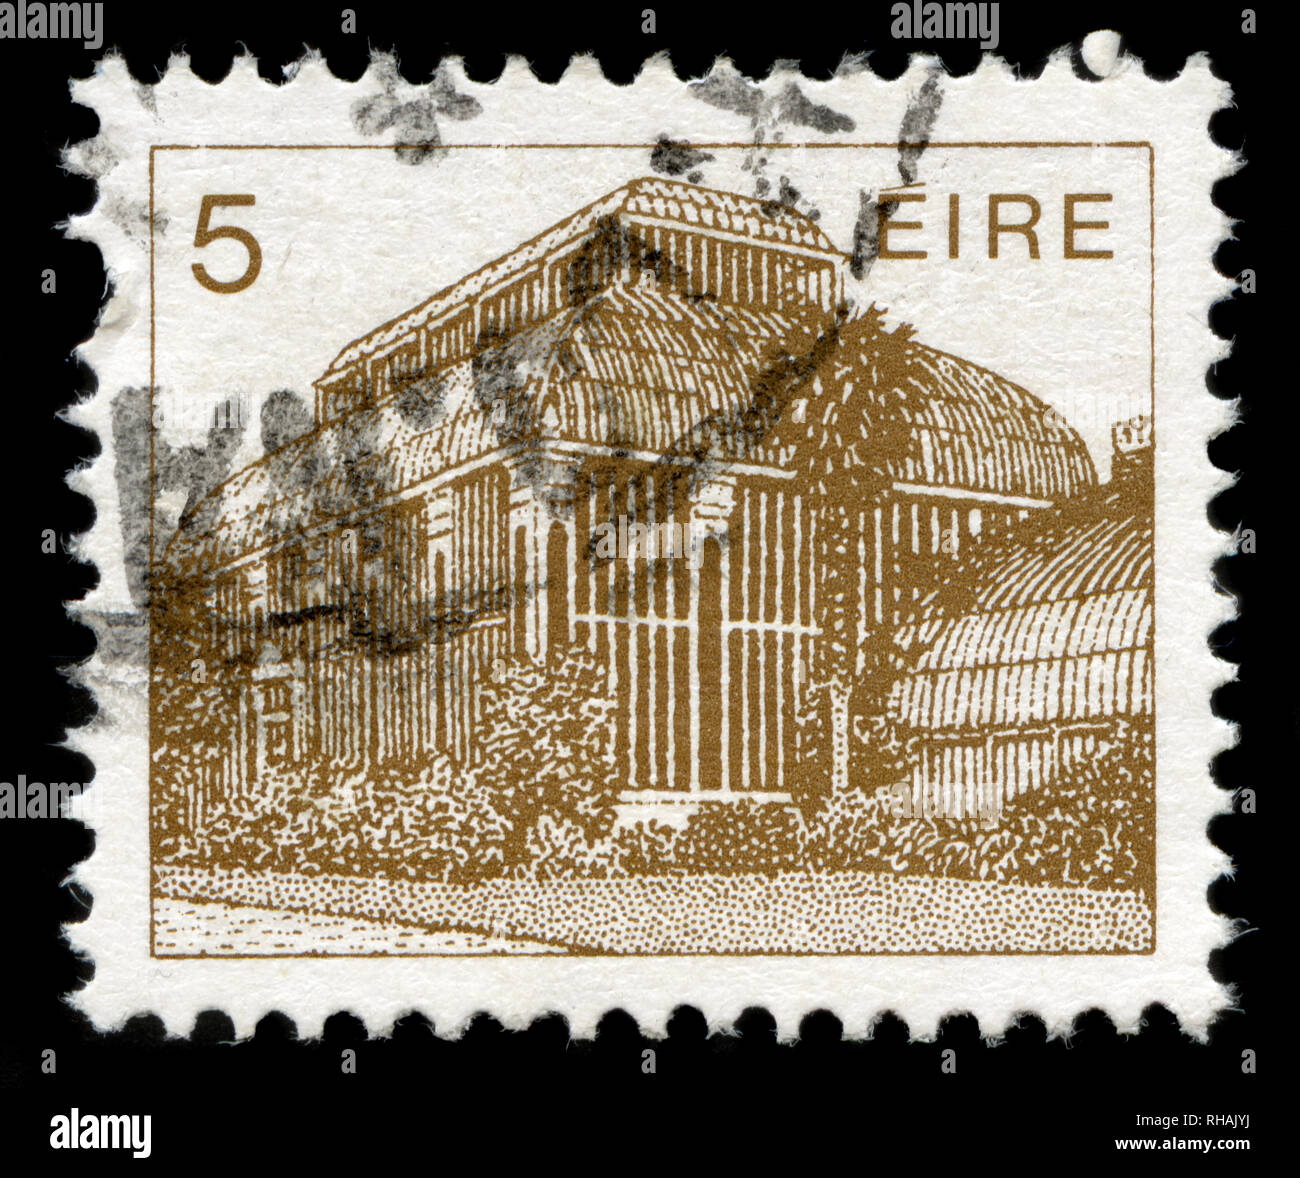 Postage stamp from Ireland in the Irish Architecture  1987efinitives 1982-1990 series issued in Stock Photo